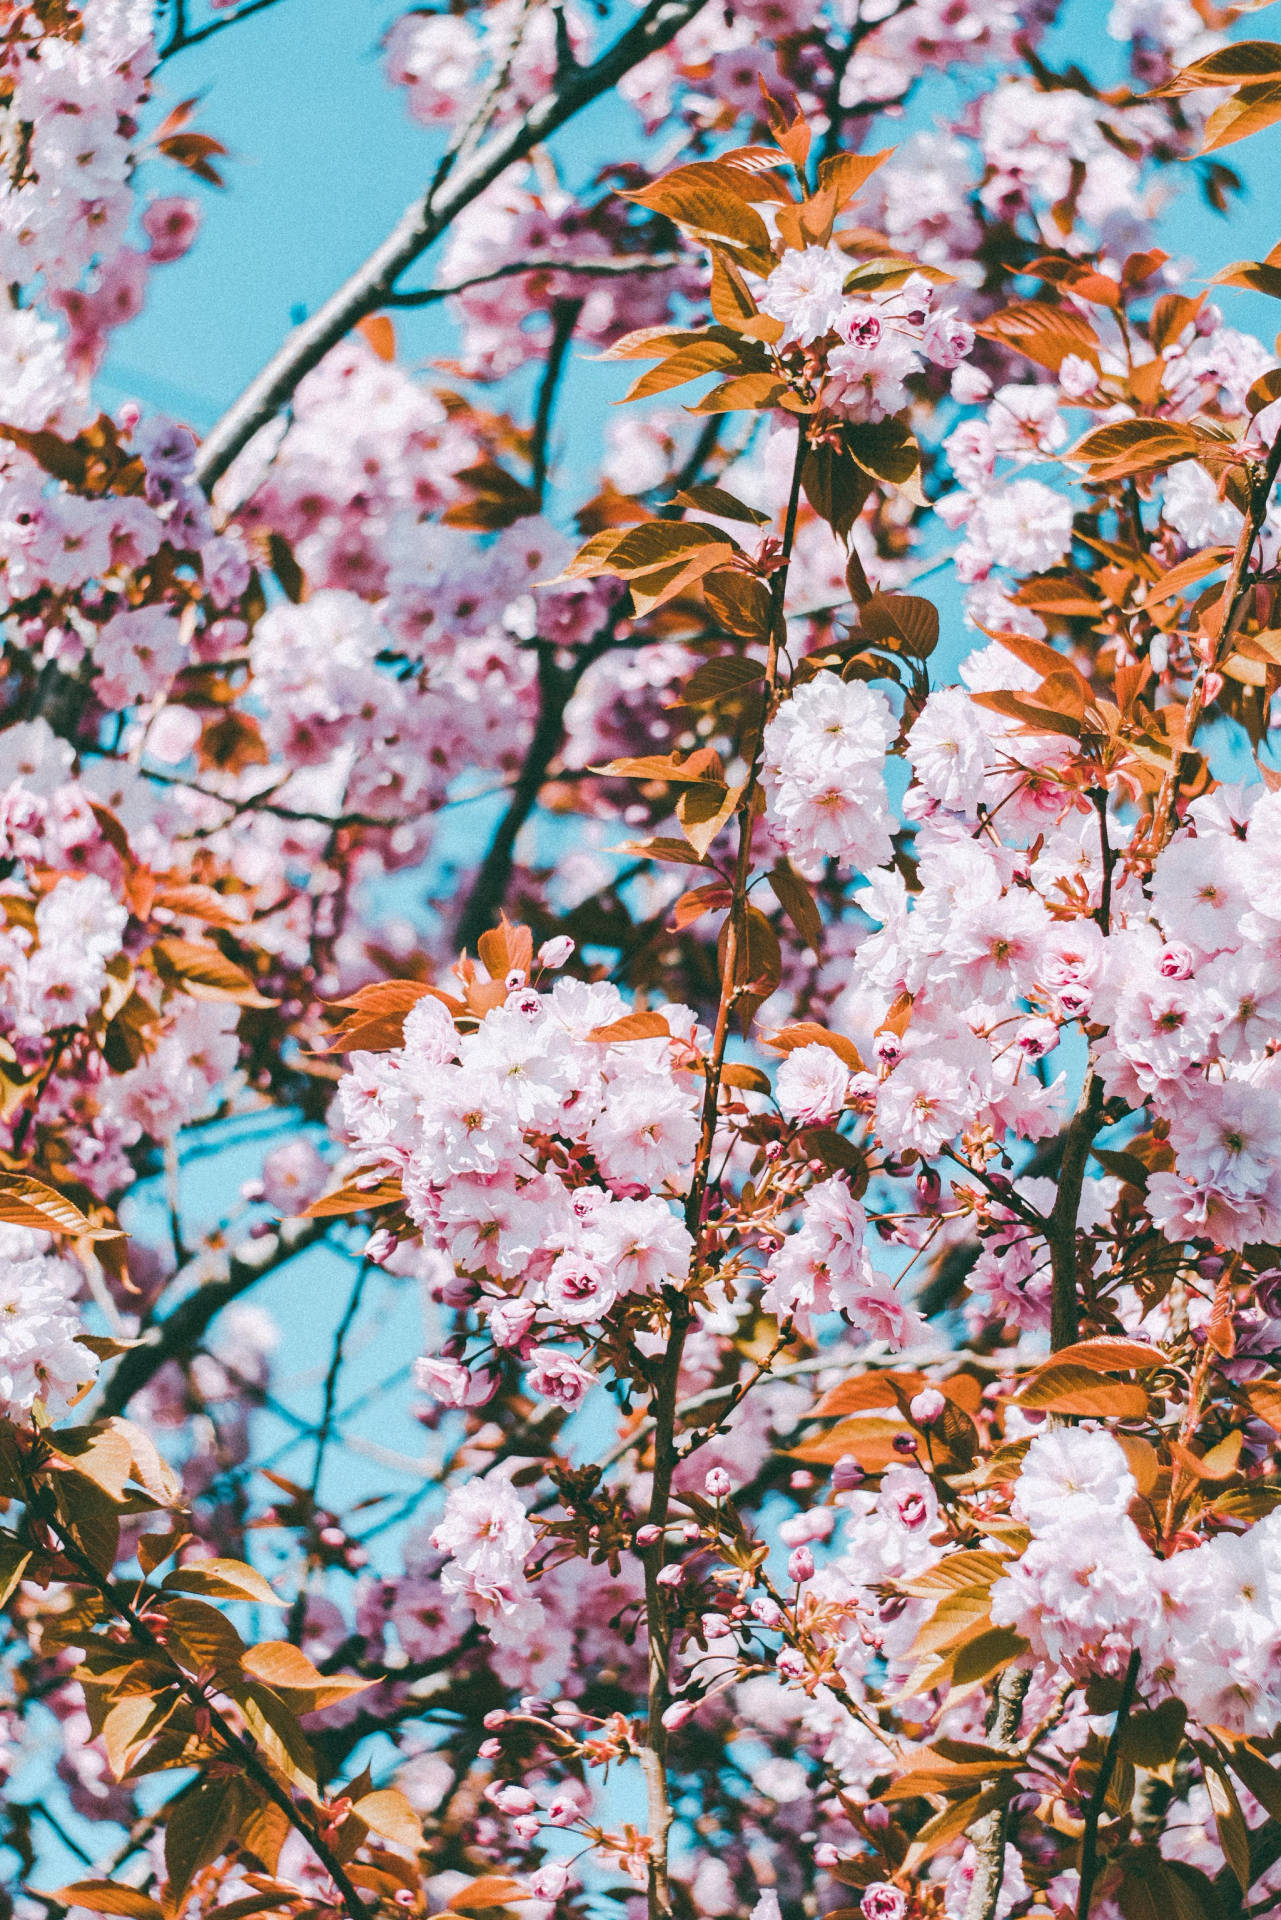 Iphone 11 Pro Max 4k Cherry Blossoms Background